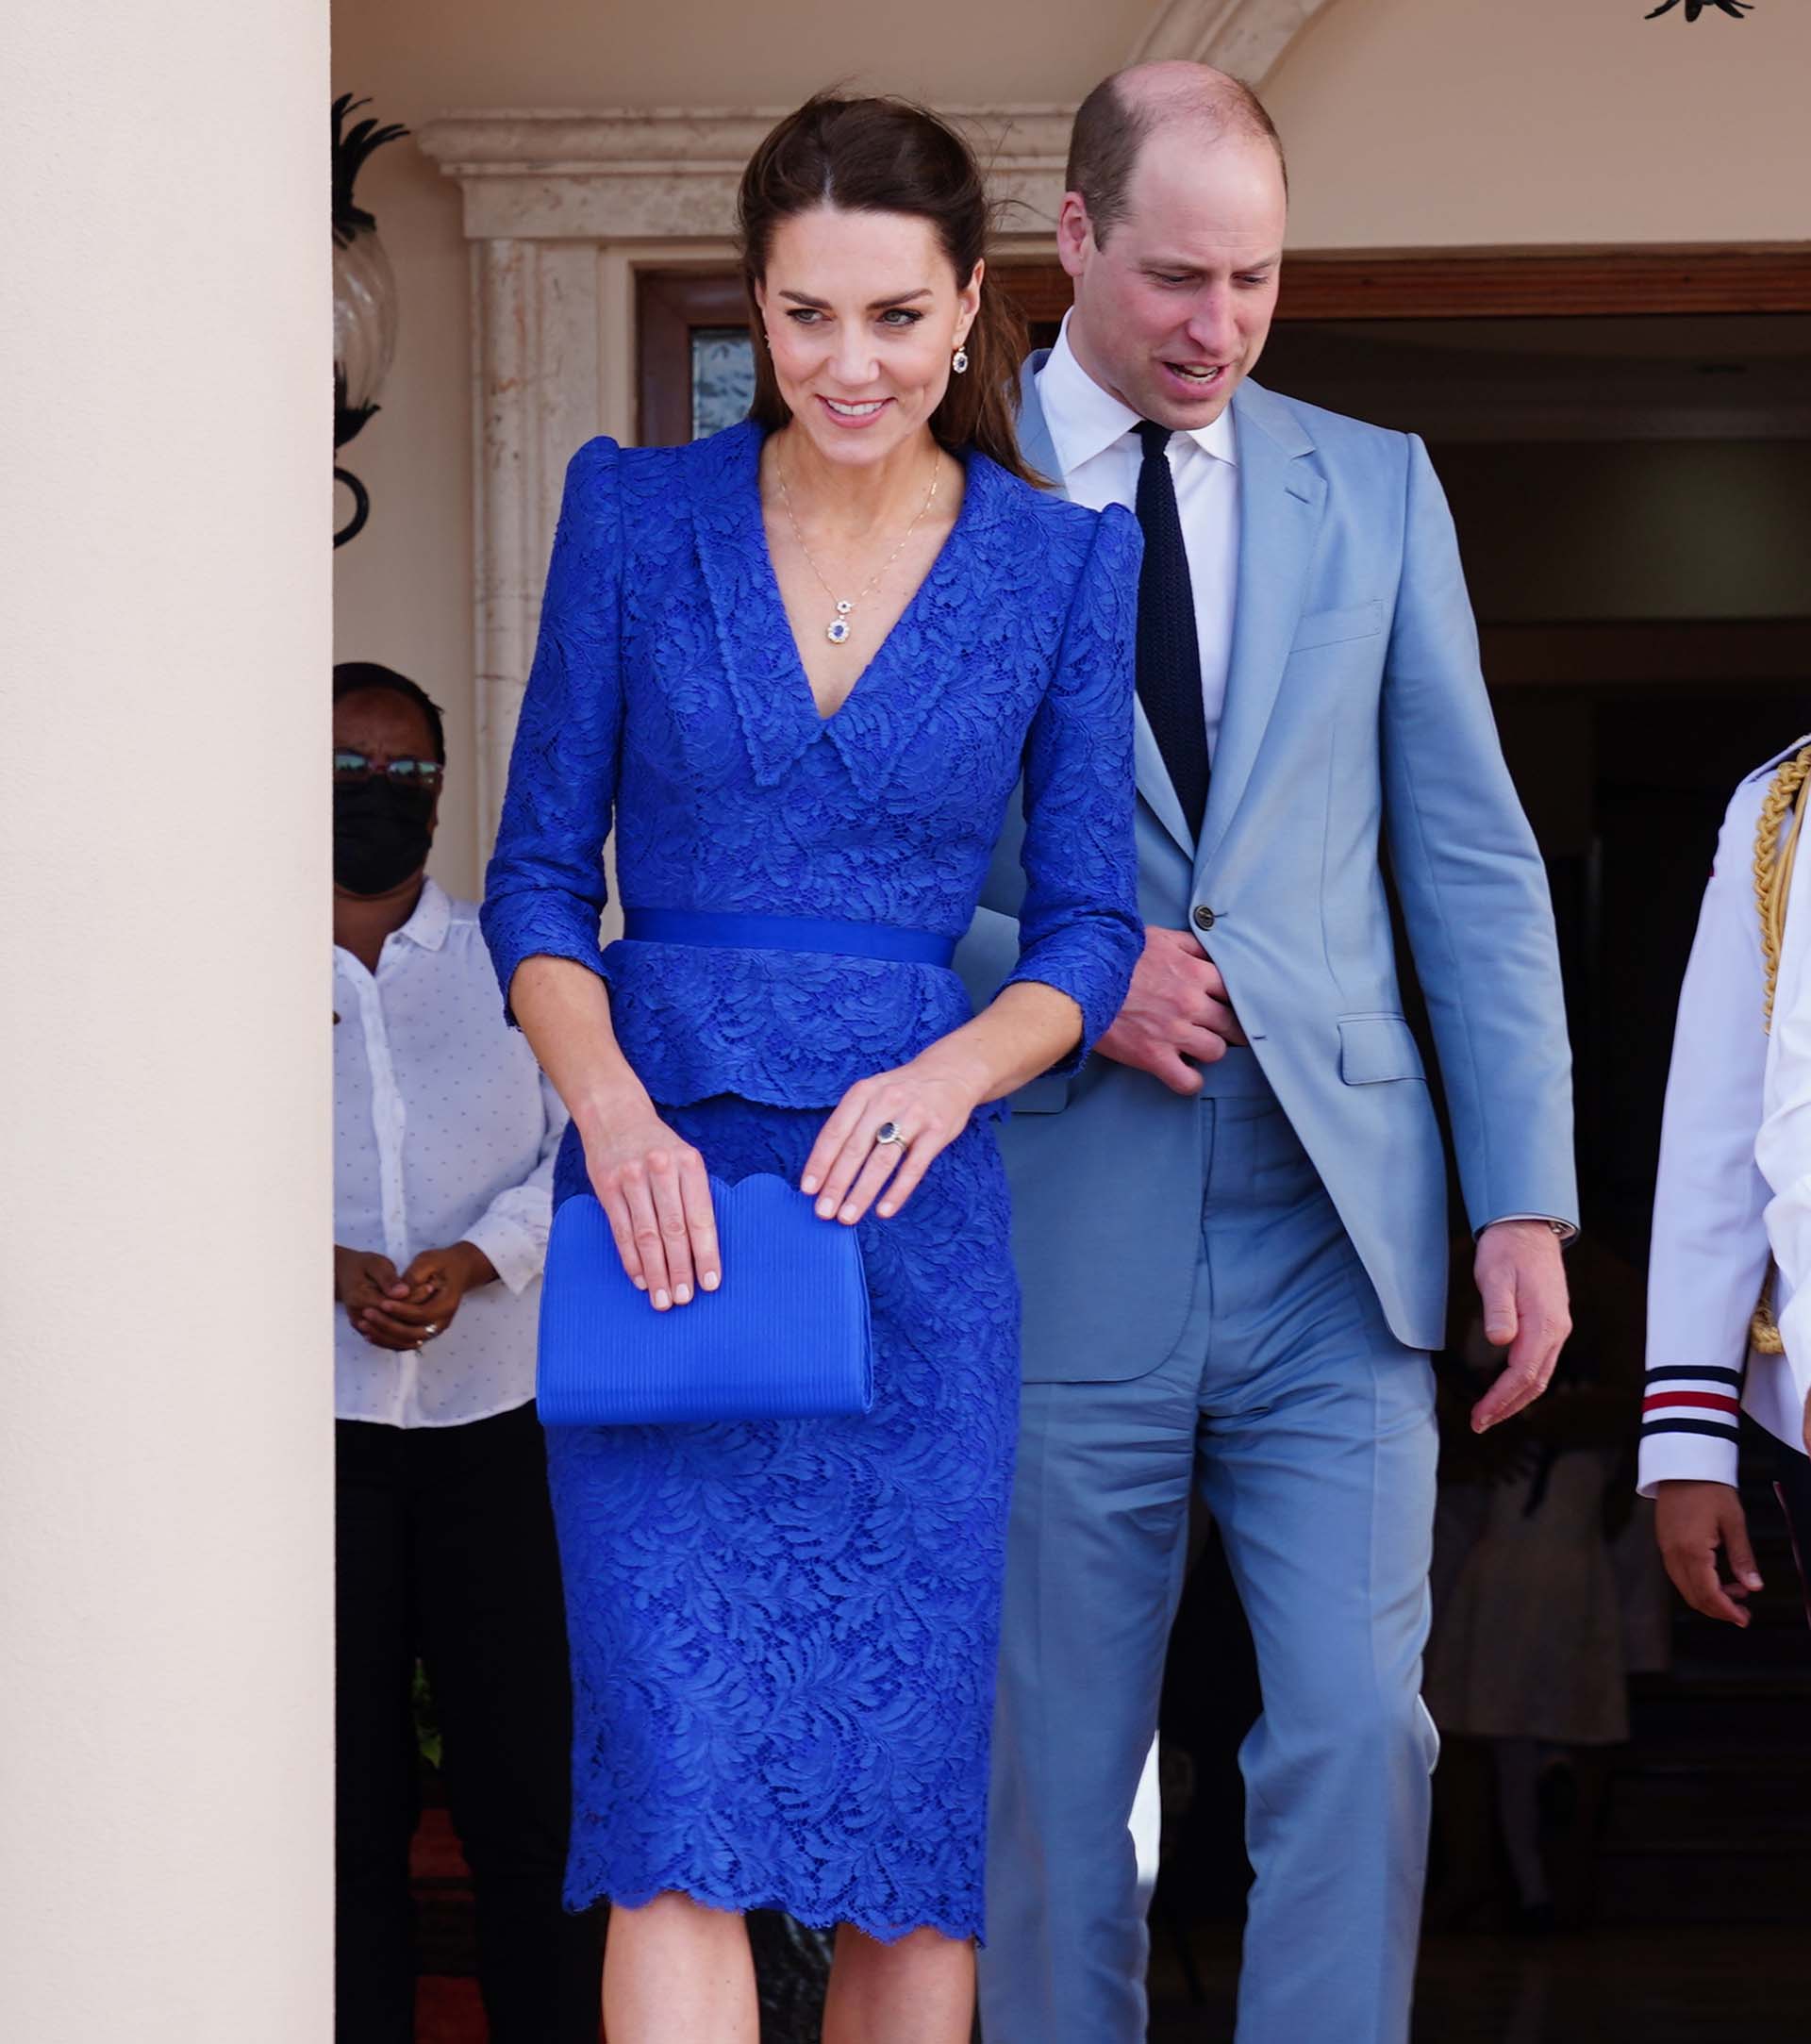 The Duke and Duchess of Cambridge after meeting the Prime Minister of Belize Johnny Briceno, at the Laing Building, Belize City, as they begin their tour of the Caribbean on behalf of the Queen to mark her Platinum Jubilee. Picture date: Saturday March 19, 2022.